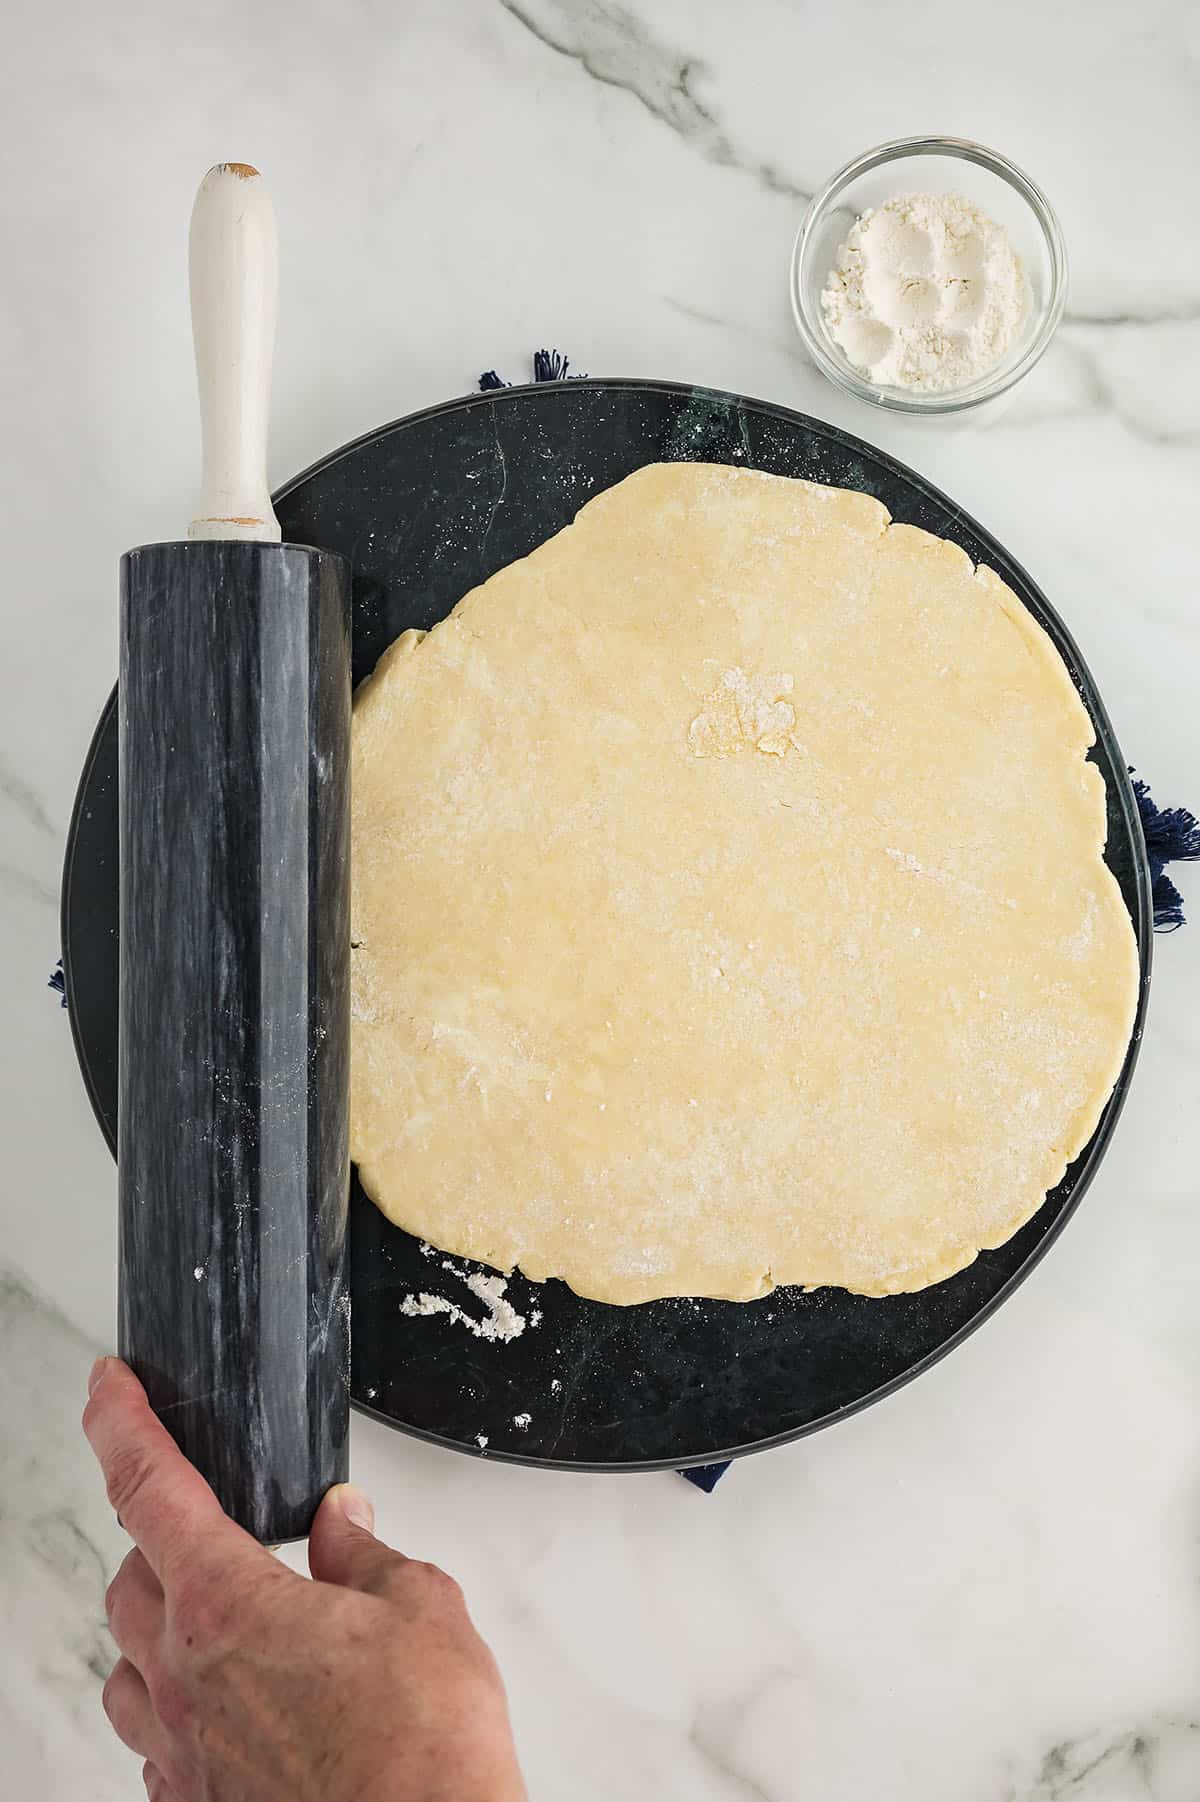 Pie dough being rolled out into a circle.